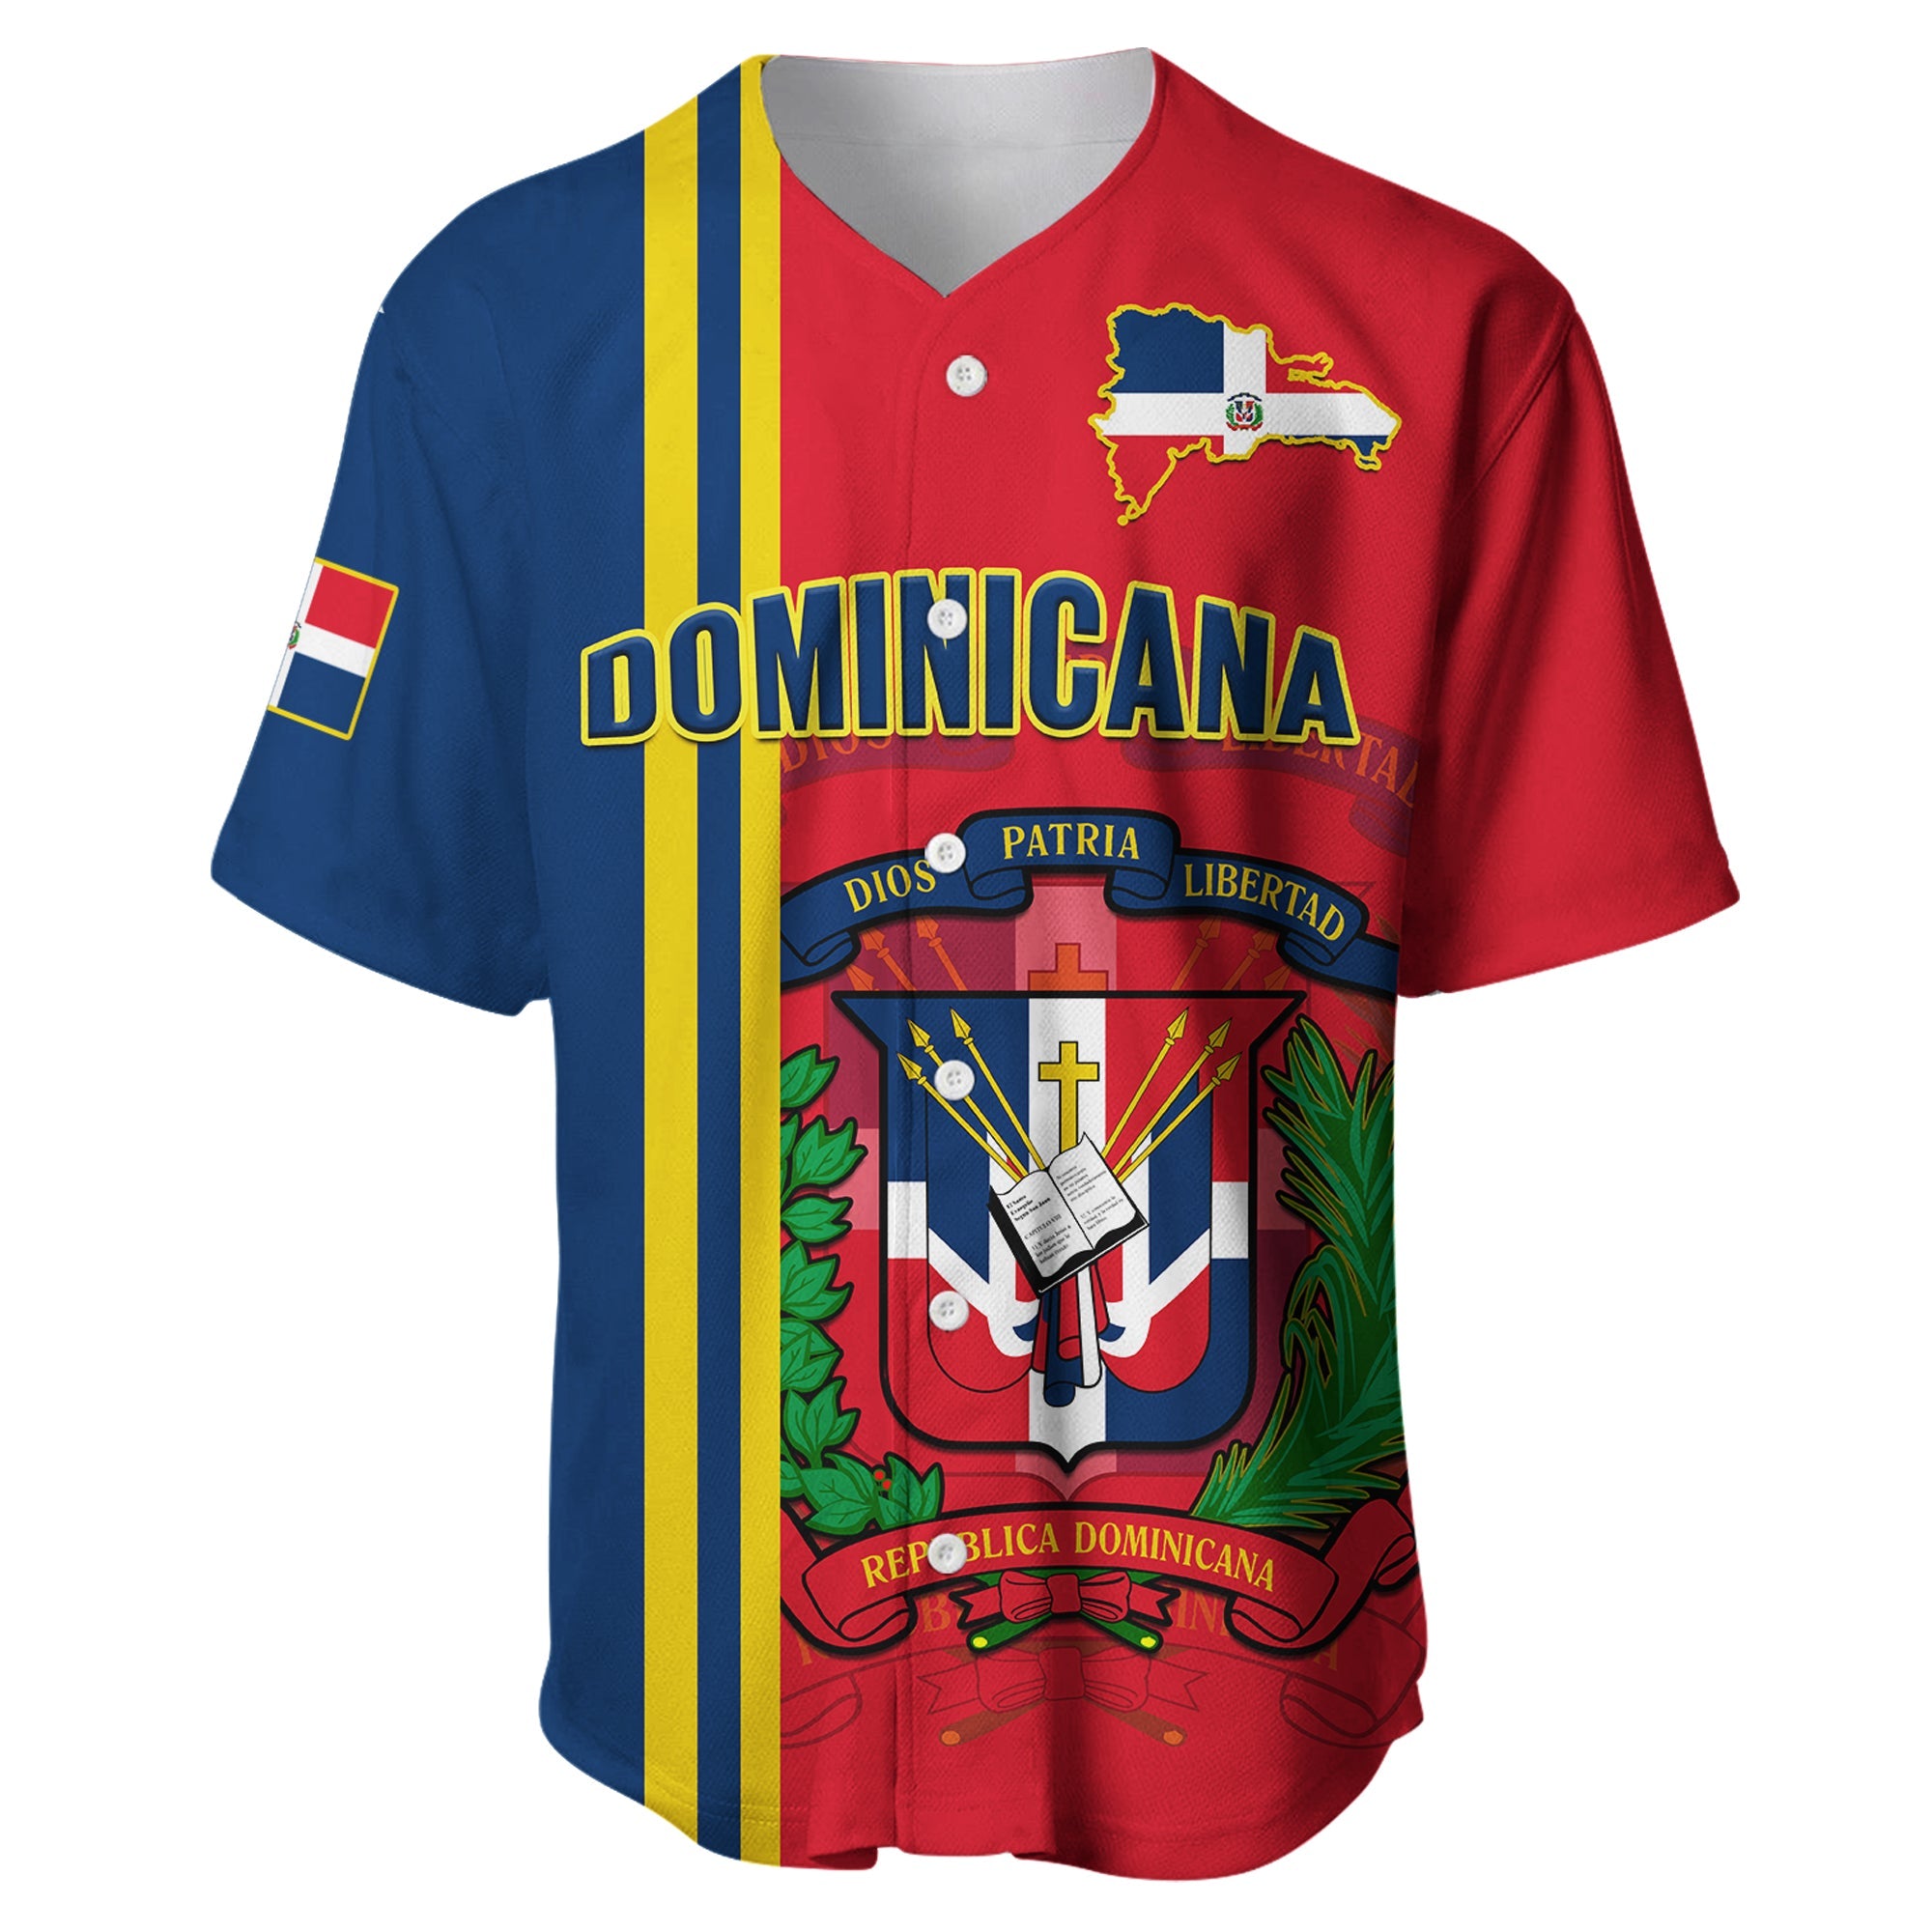 dominican-republic-baseball-jersey-happy-179-years-of-independence-ver01